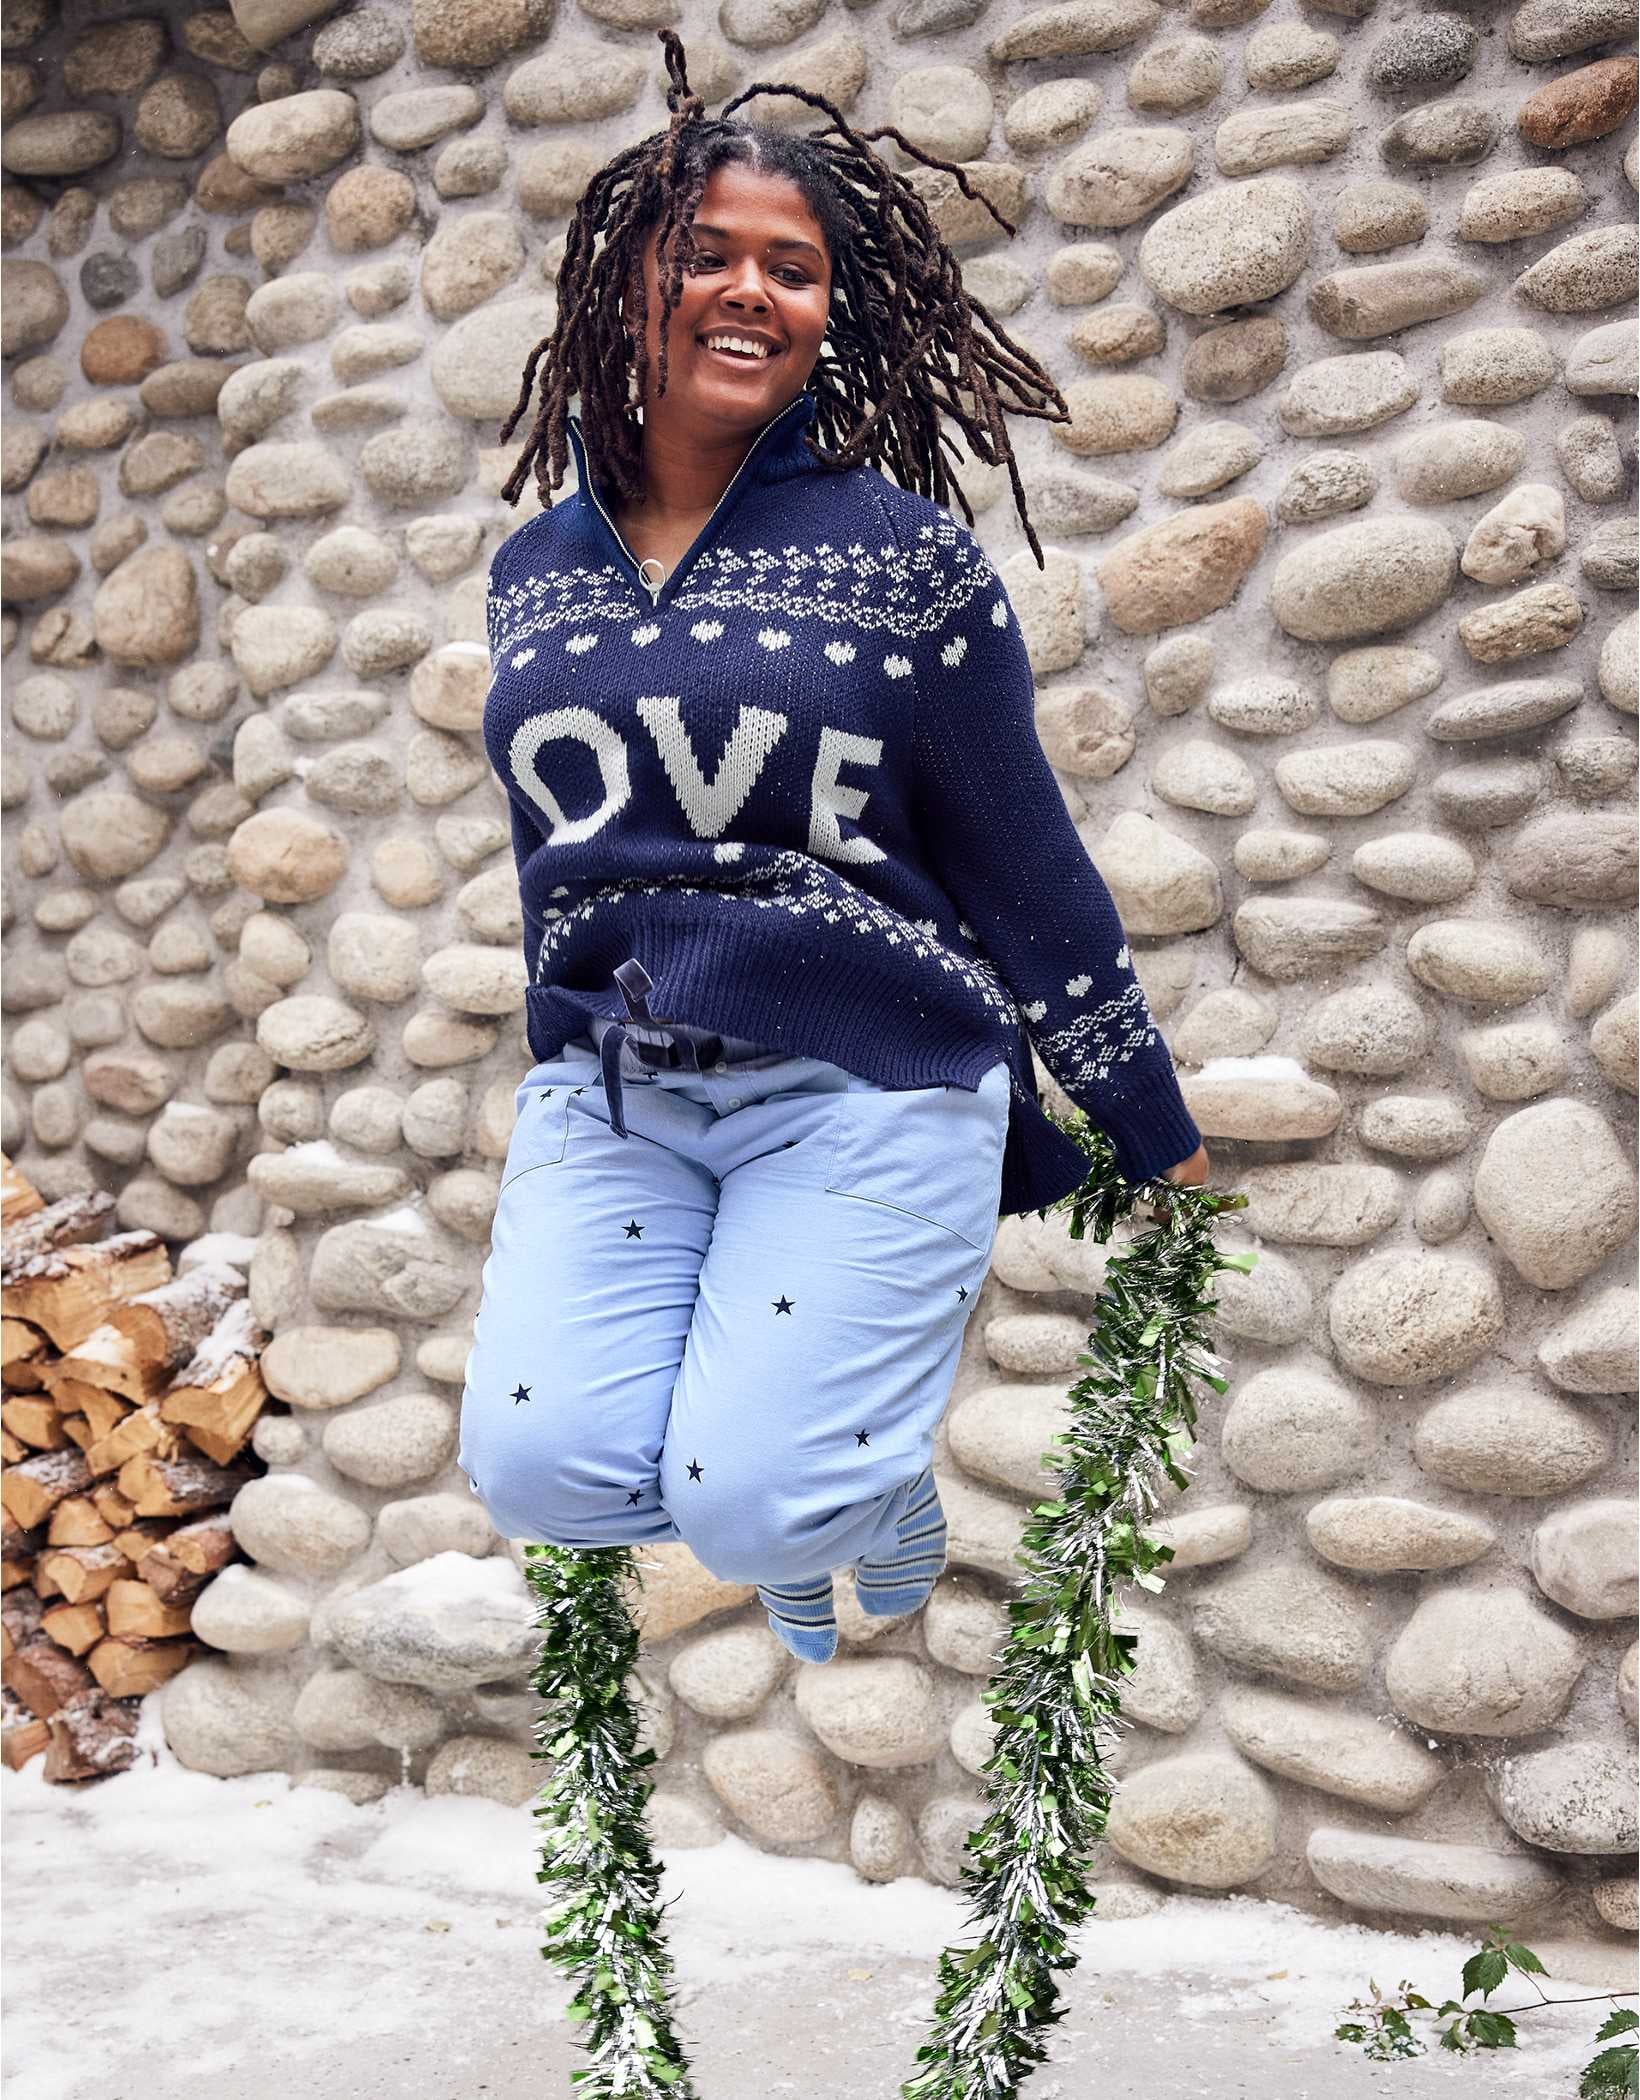 Aerie holiday gifts: Shop pajamas, loungewear, and sweaters - Reviewed